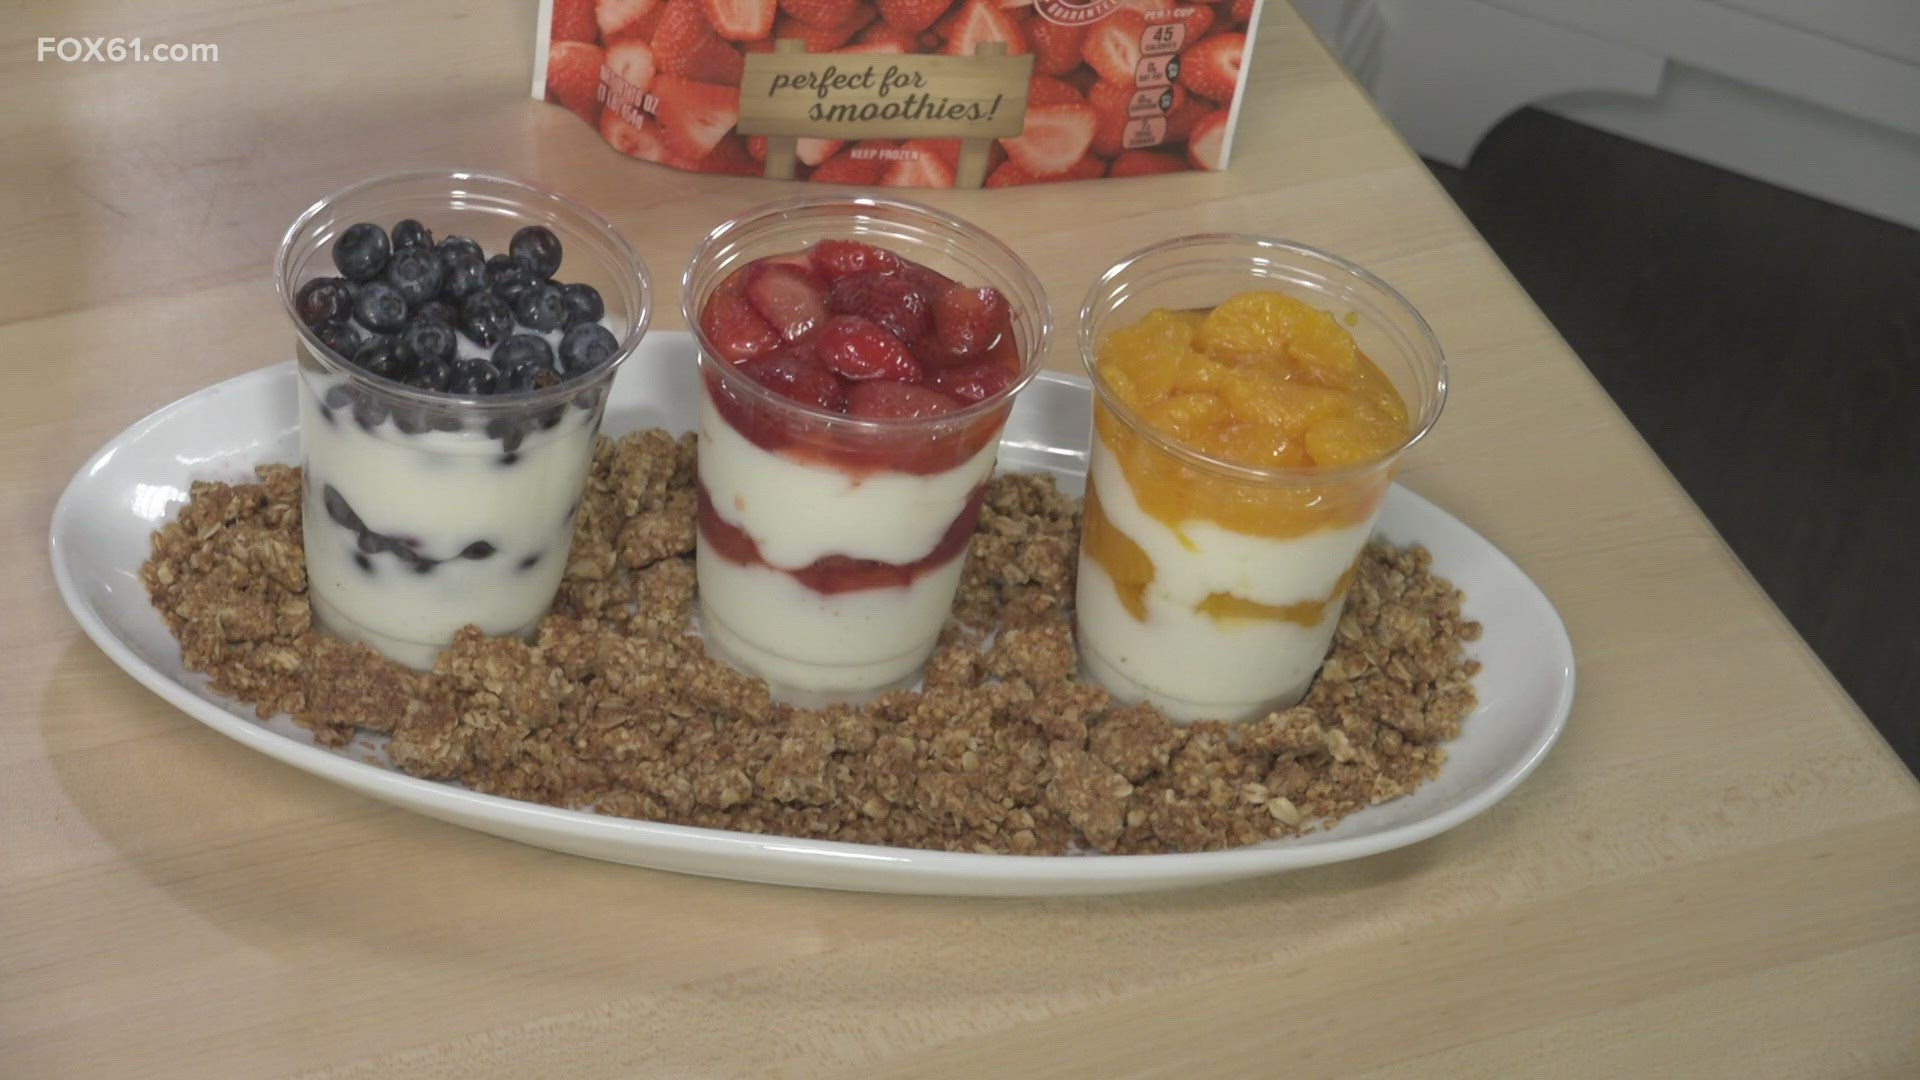 The fruit & Oats parfait at East Hartford Public Schools is a popular breakfast and lunch option in the cafeteria, and it's easy to make at home.